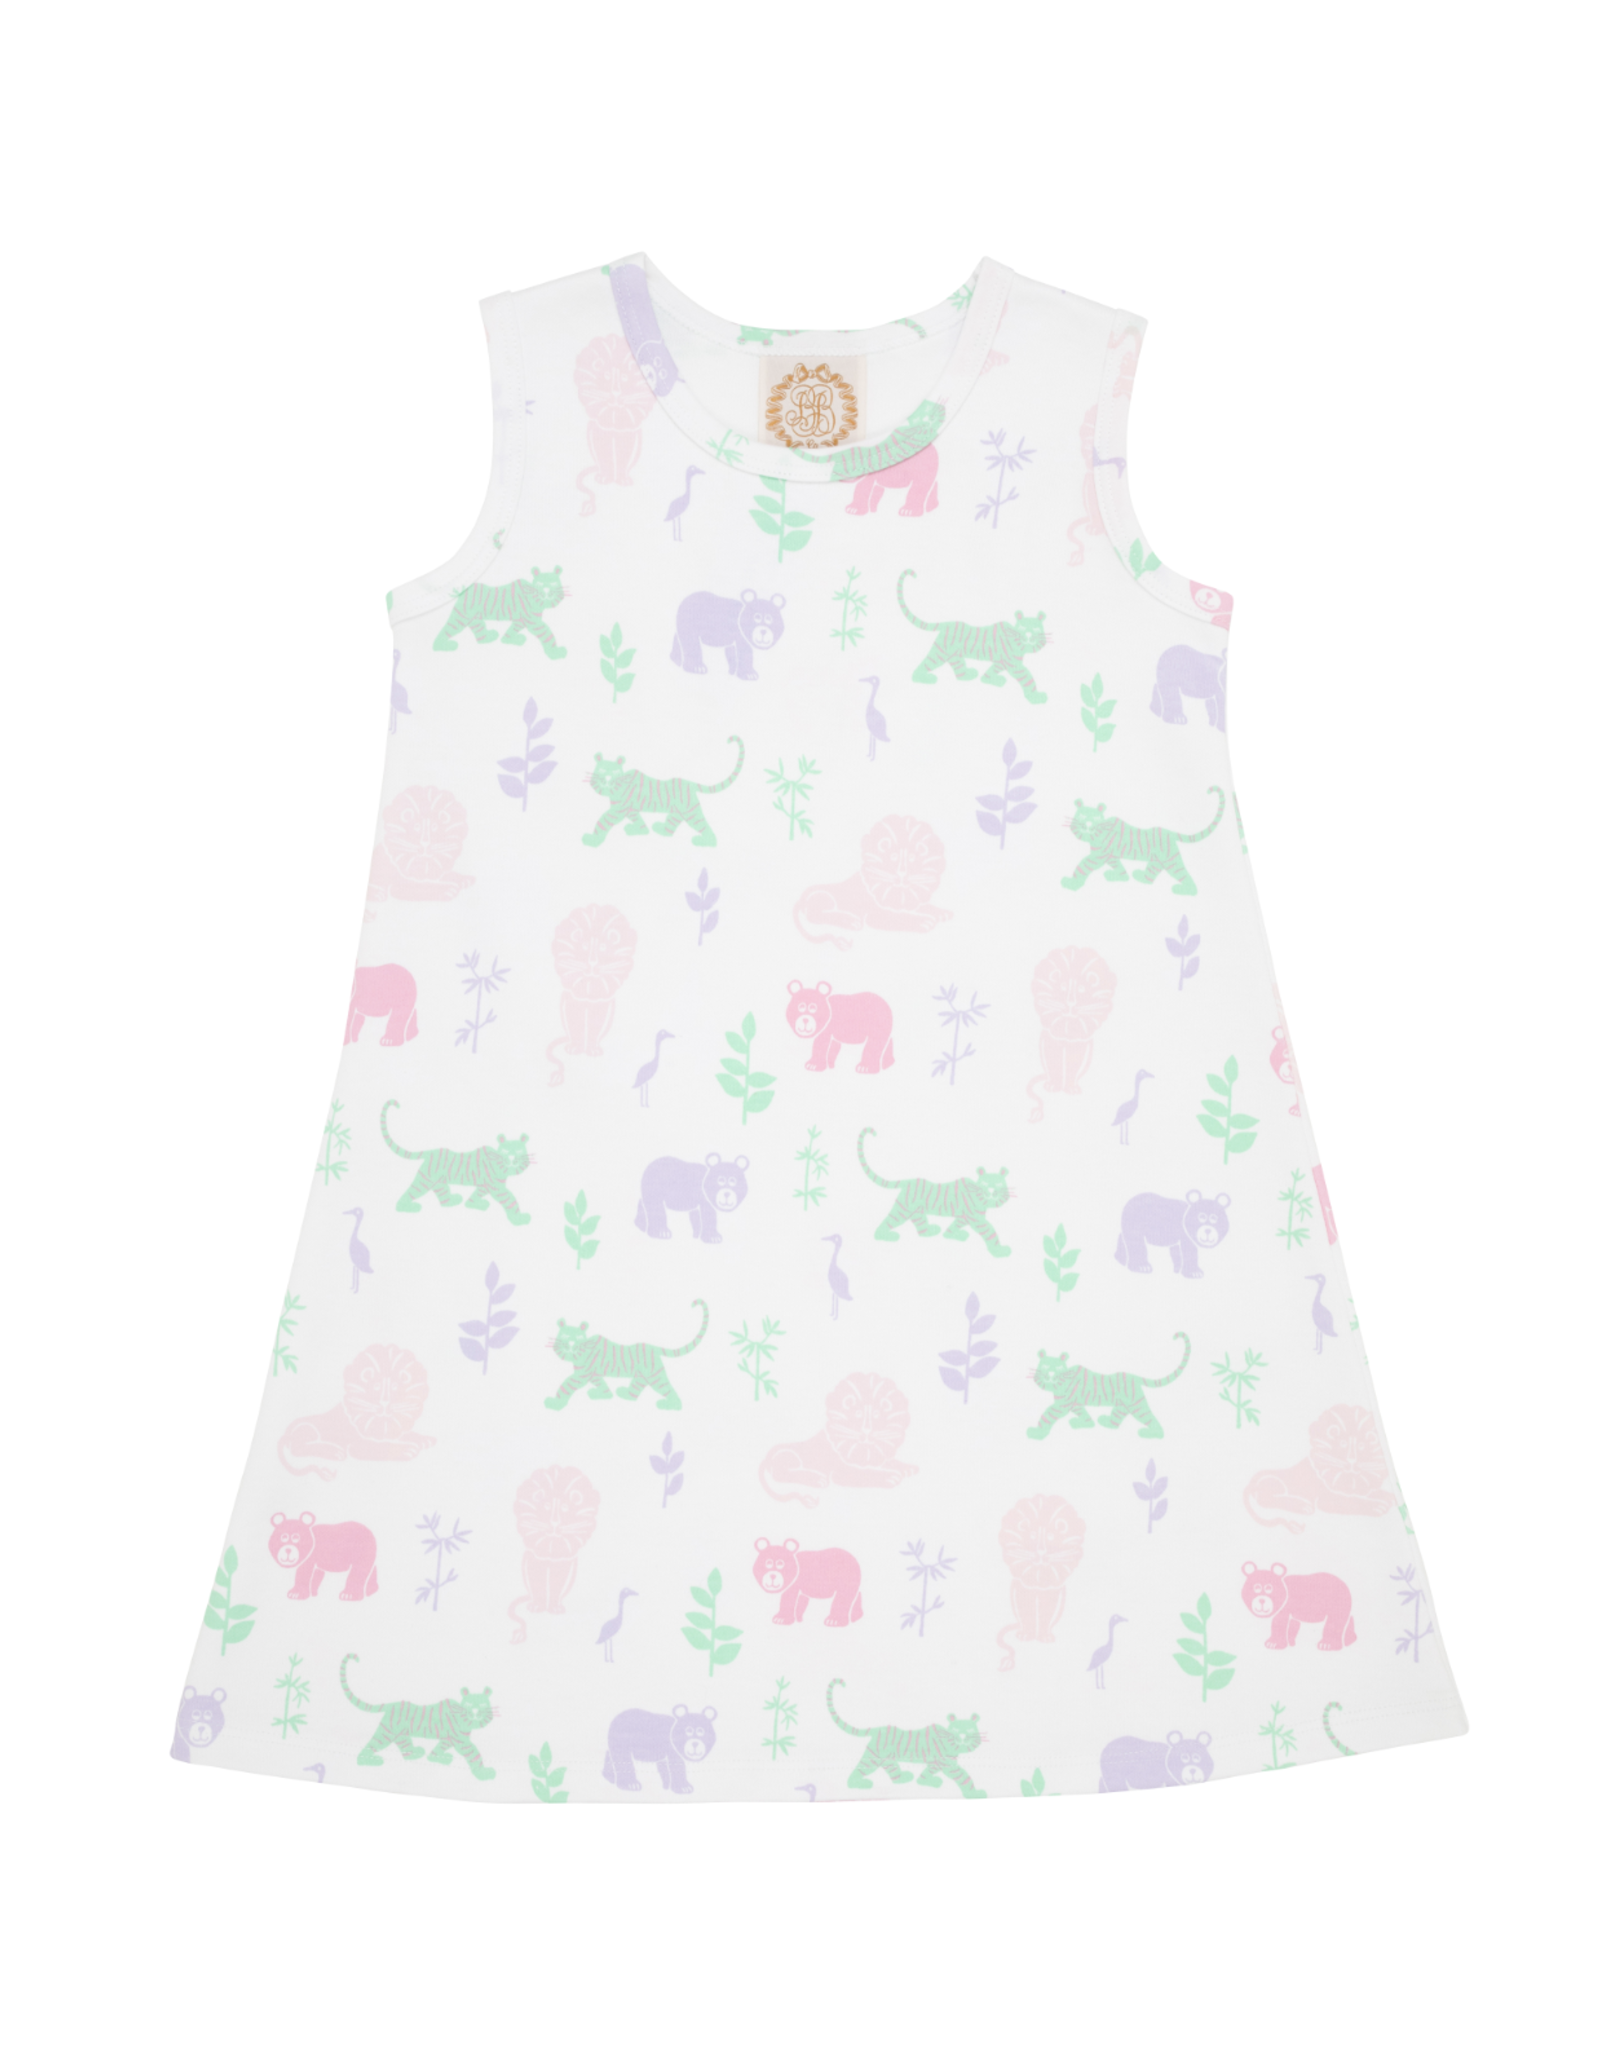 TBBC Sleeveless Polly Play Dress Lions Tigers And Bears